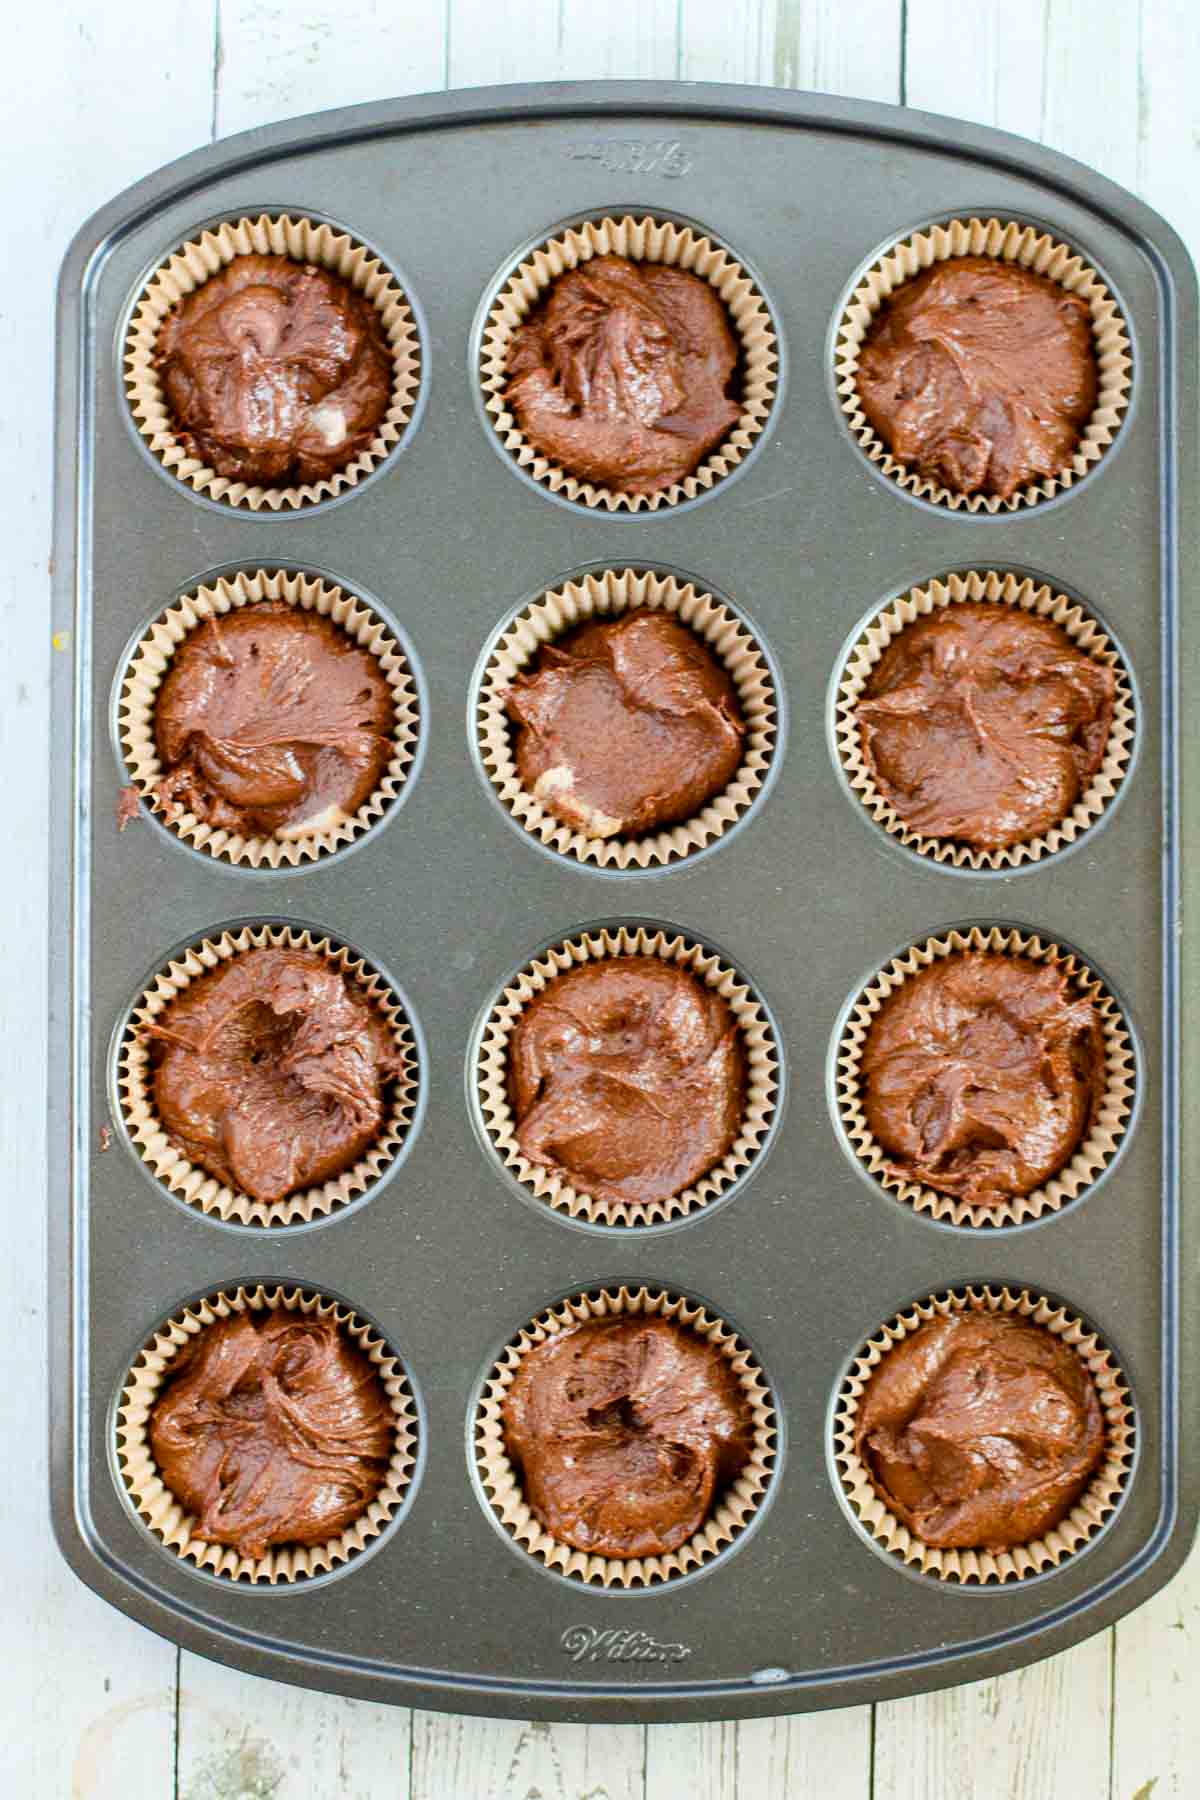 A 12-cupcake baking mold lined with cupcake wrappers and filled with raw chocolate peanut butter buckeye batter ready for baking.